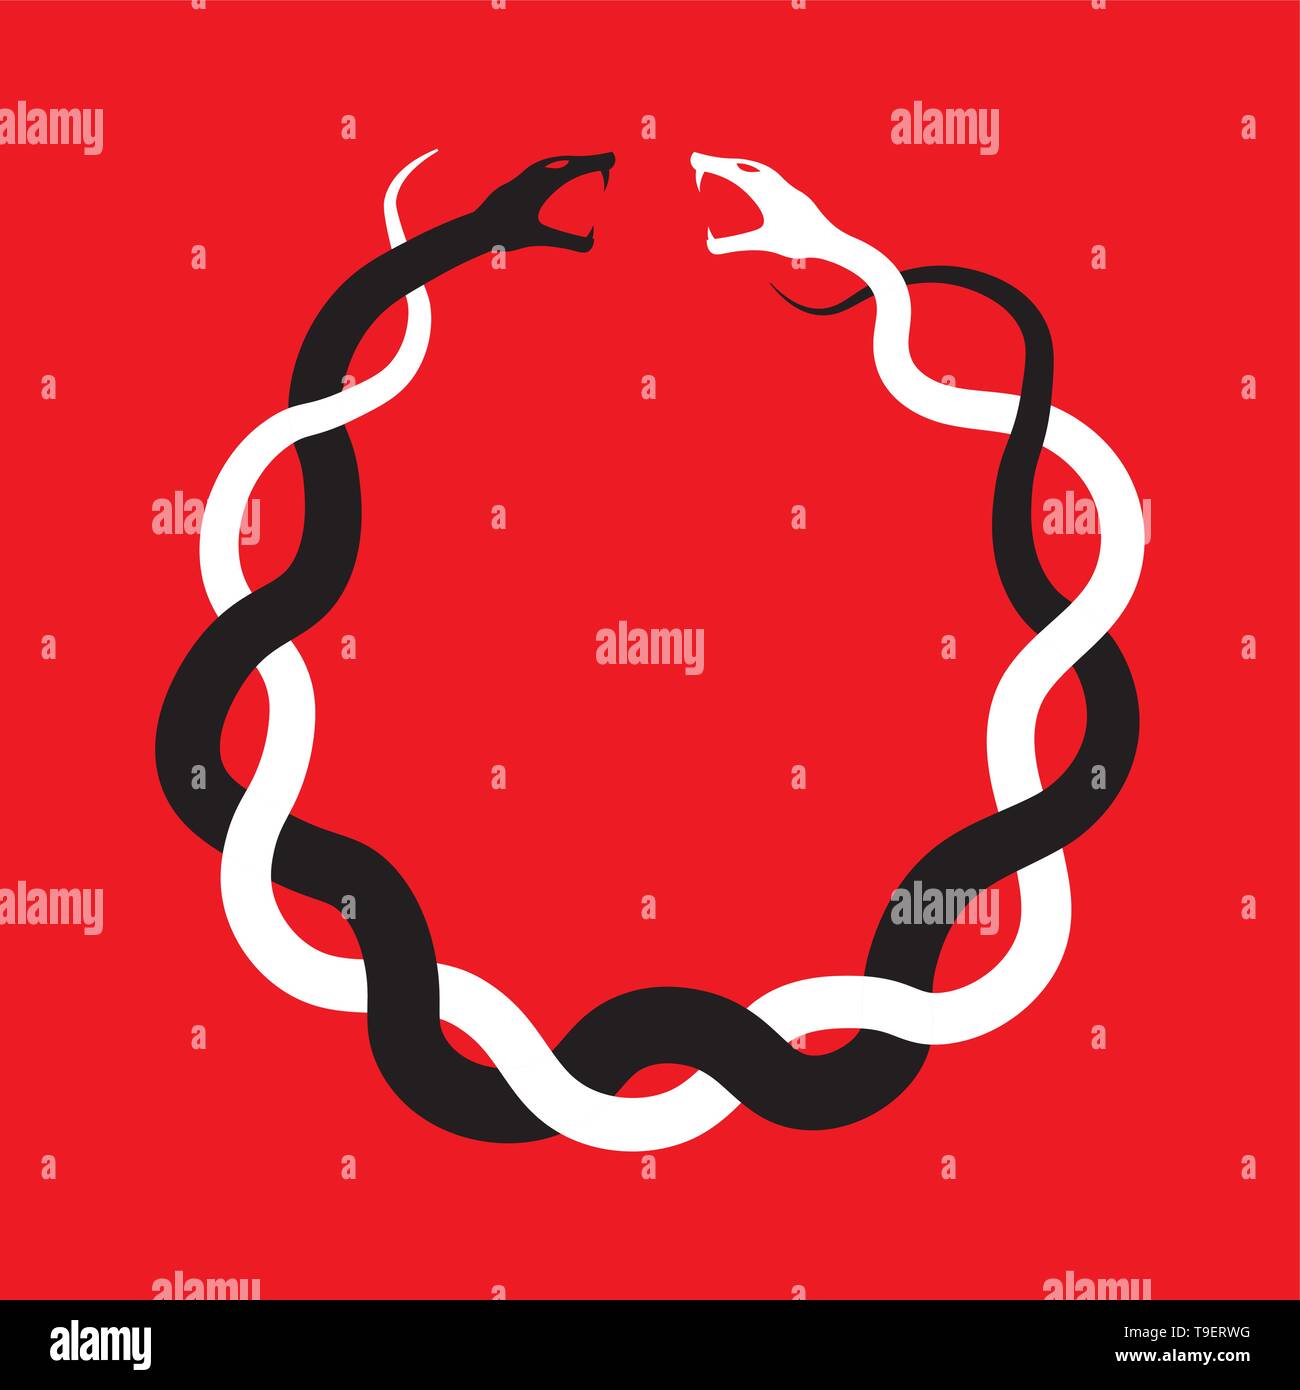 Intertwined snakes facing each other - circle symbol Stock Vector